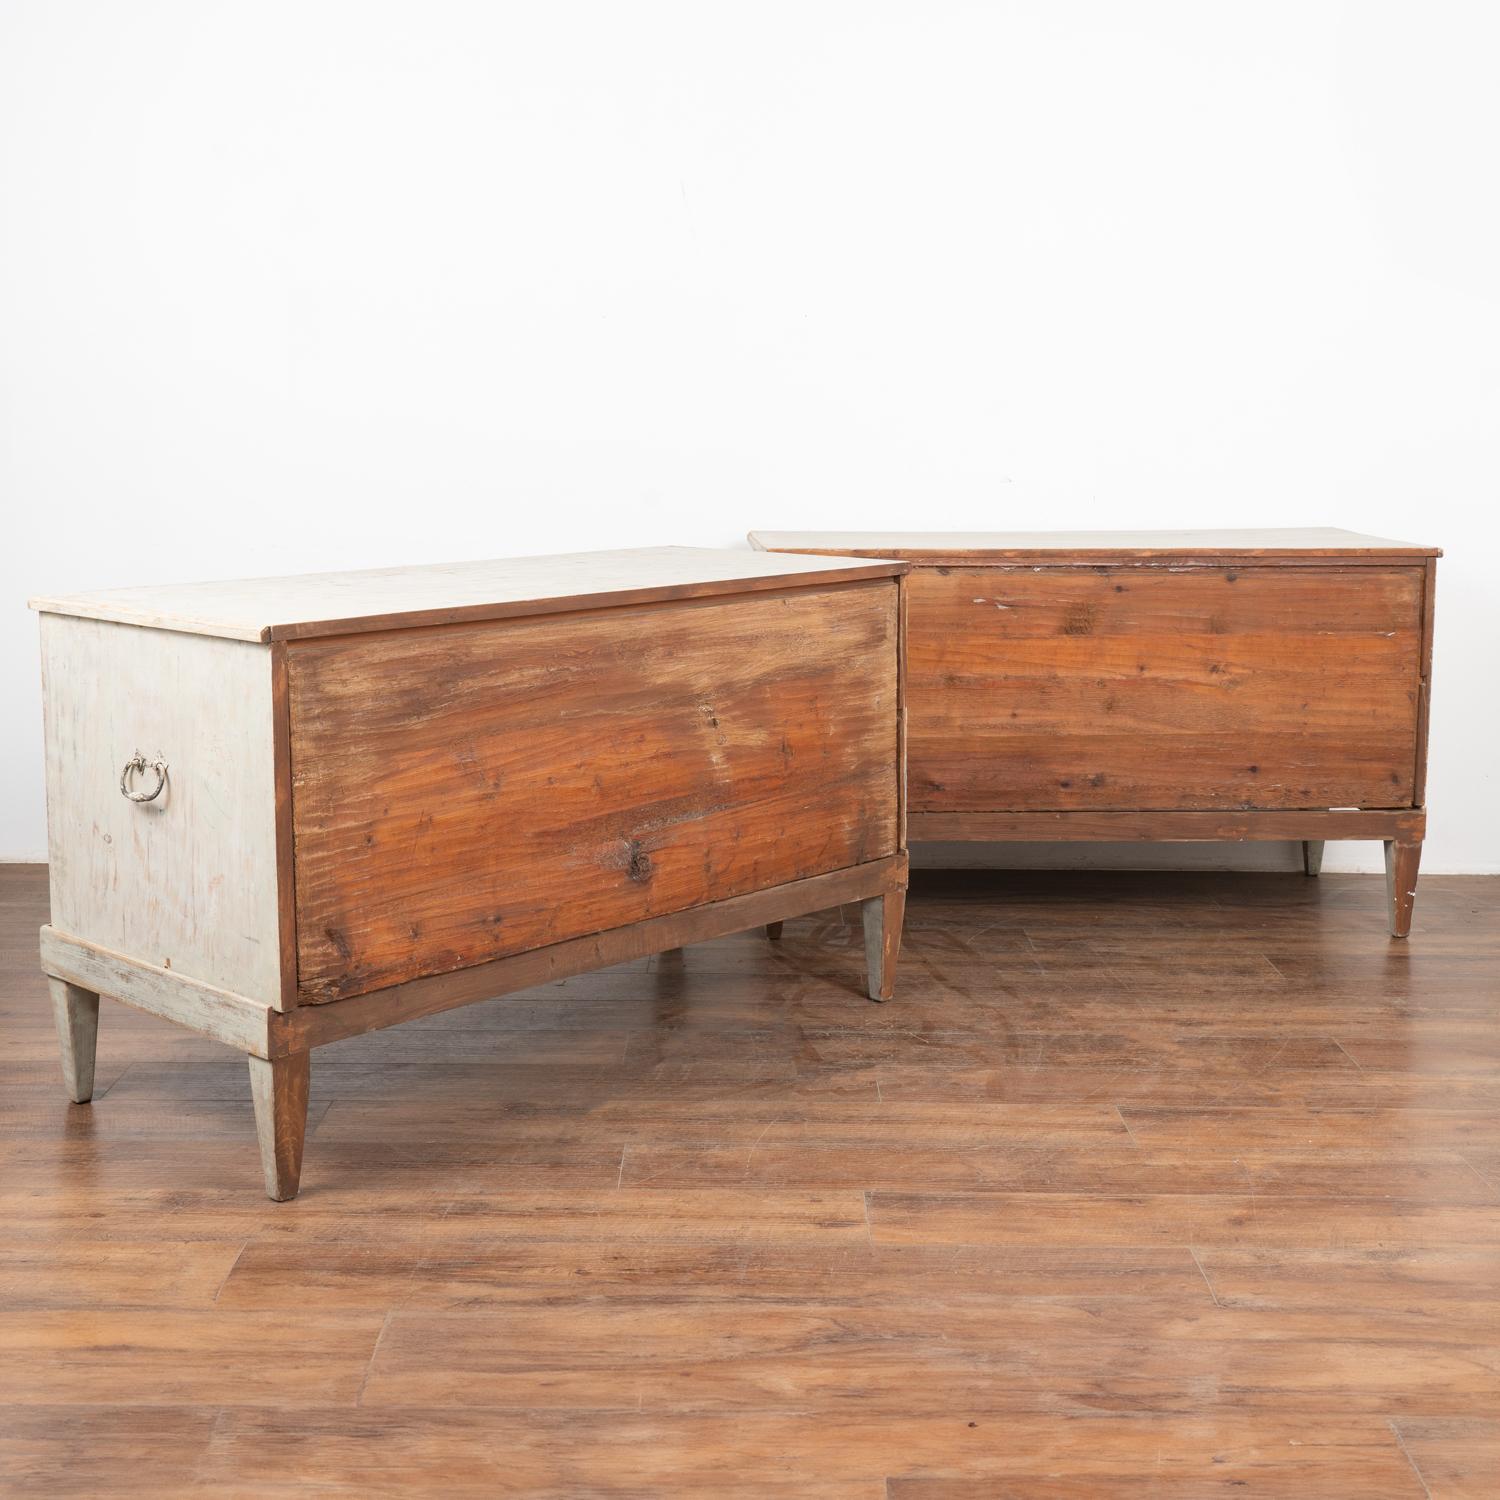 Pair, Long Gray Painted Pine Chests of Two Drawers, Sweden circa 1800-40 For Sale 5